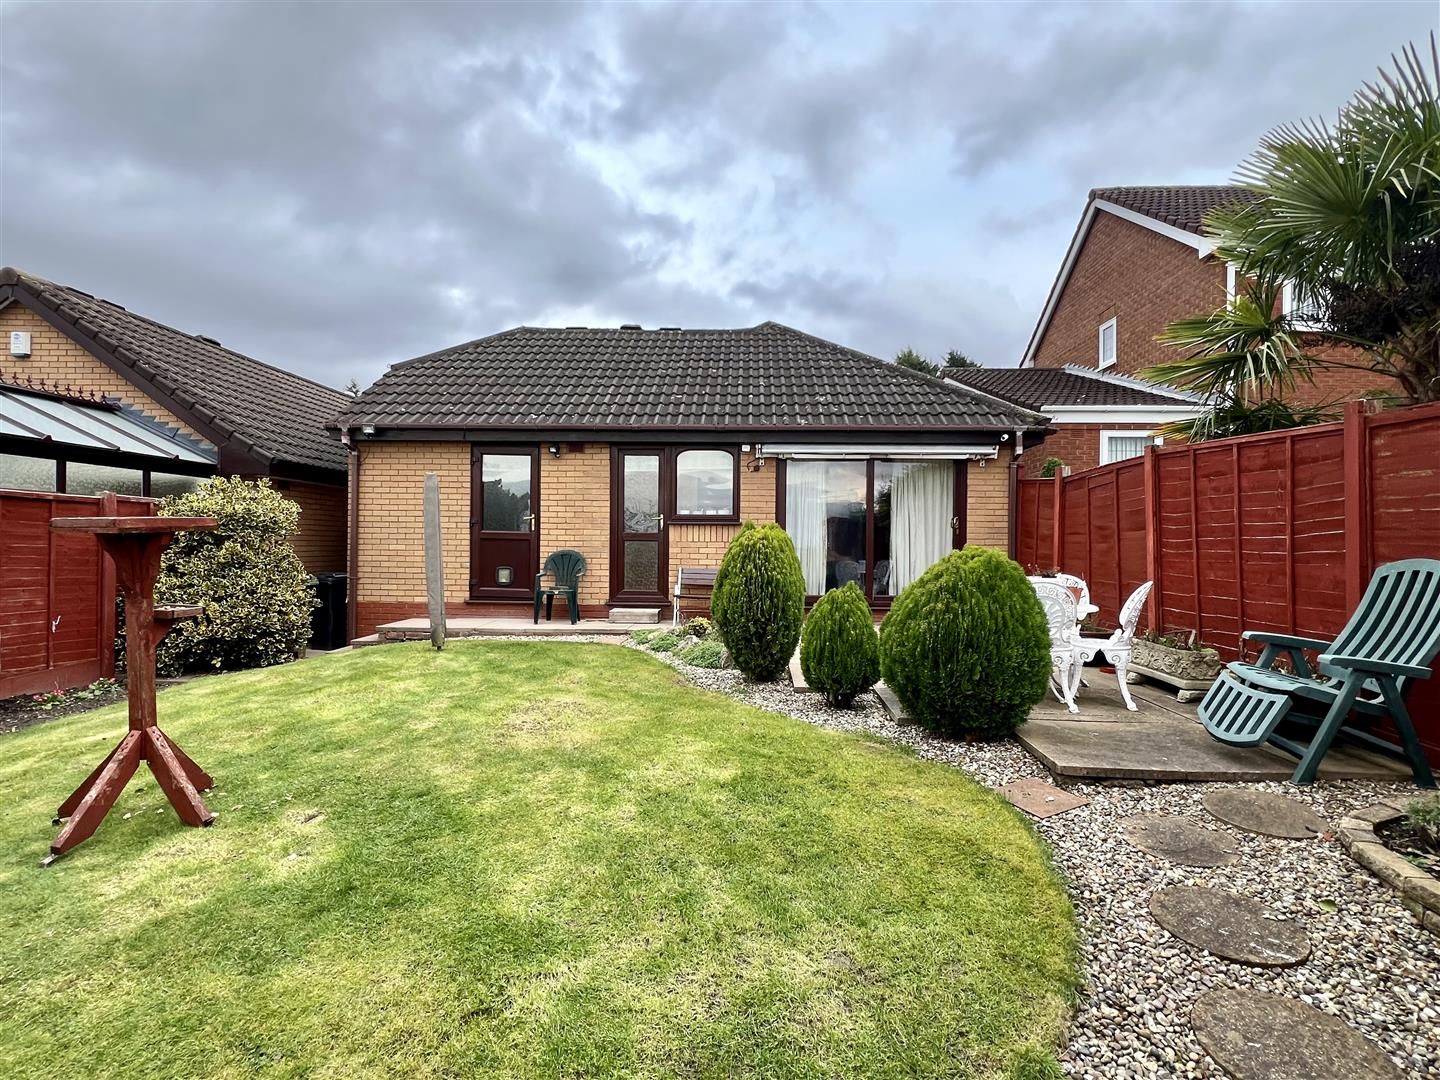 2 bed detached bungalow for sale in Brades Close, Halesowen  - Property Image 14